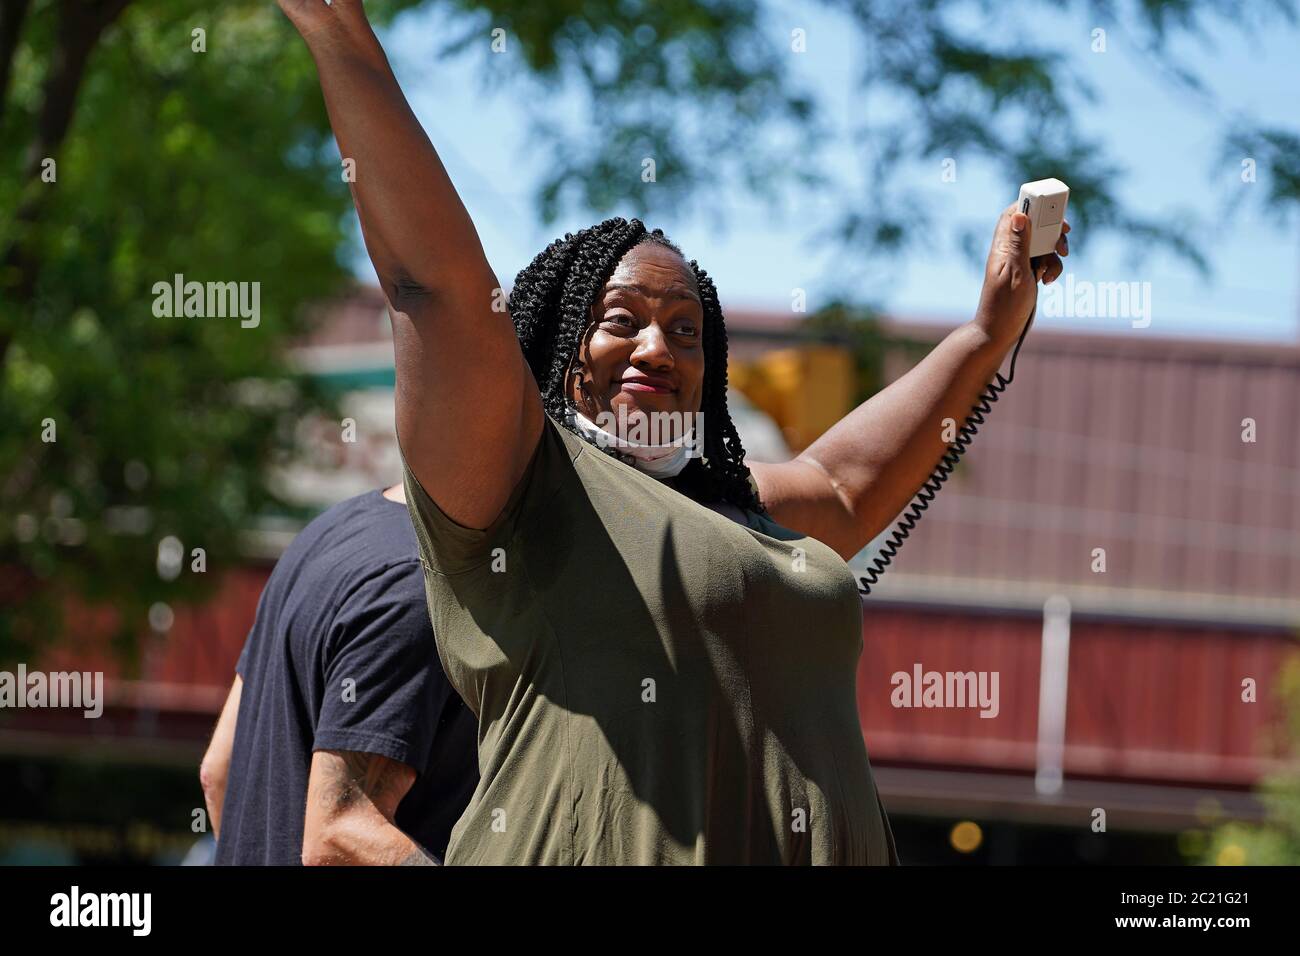 Shonta Ford, a small business owner in Wescosville, speaks to community members June 14, 2020, during a peace march in Emmaus, Pennsylvania. Stock Photo